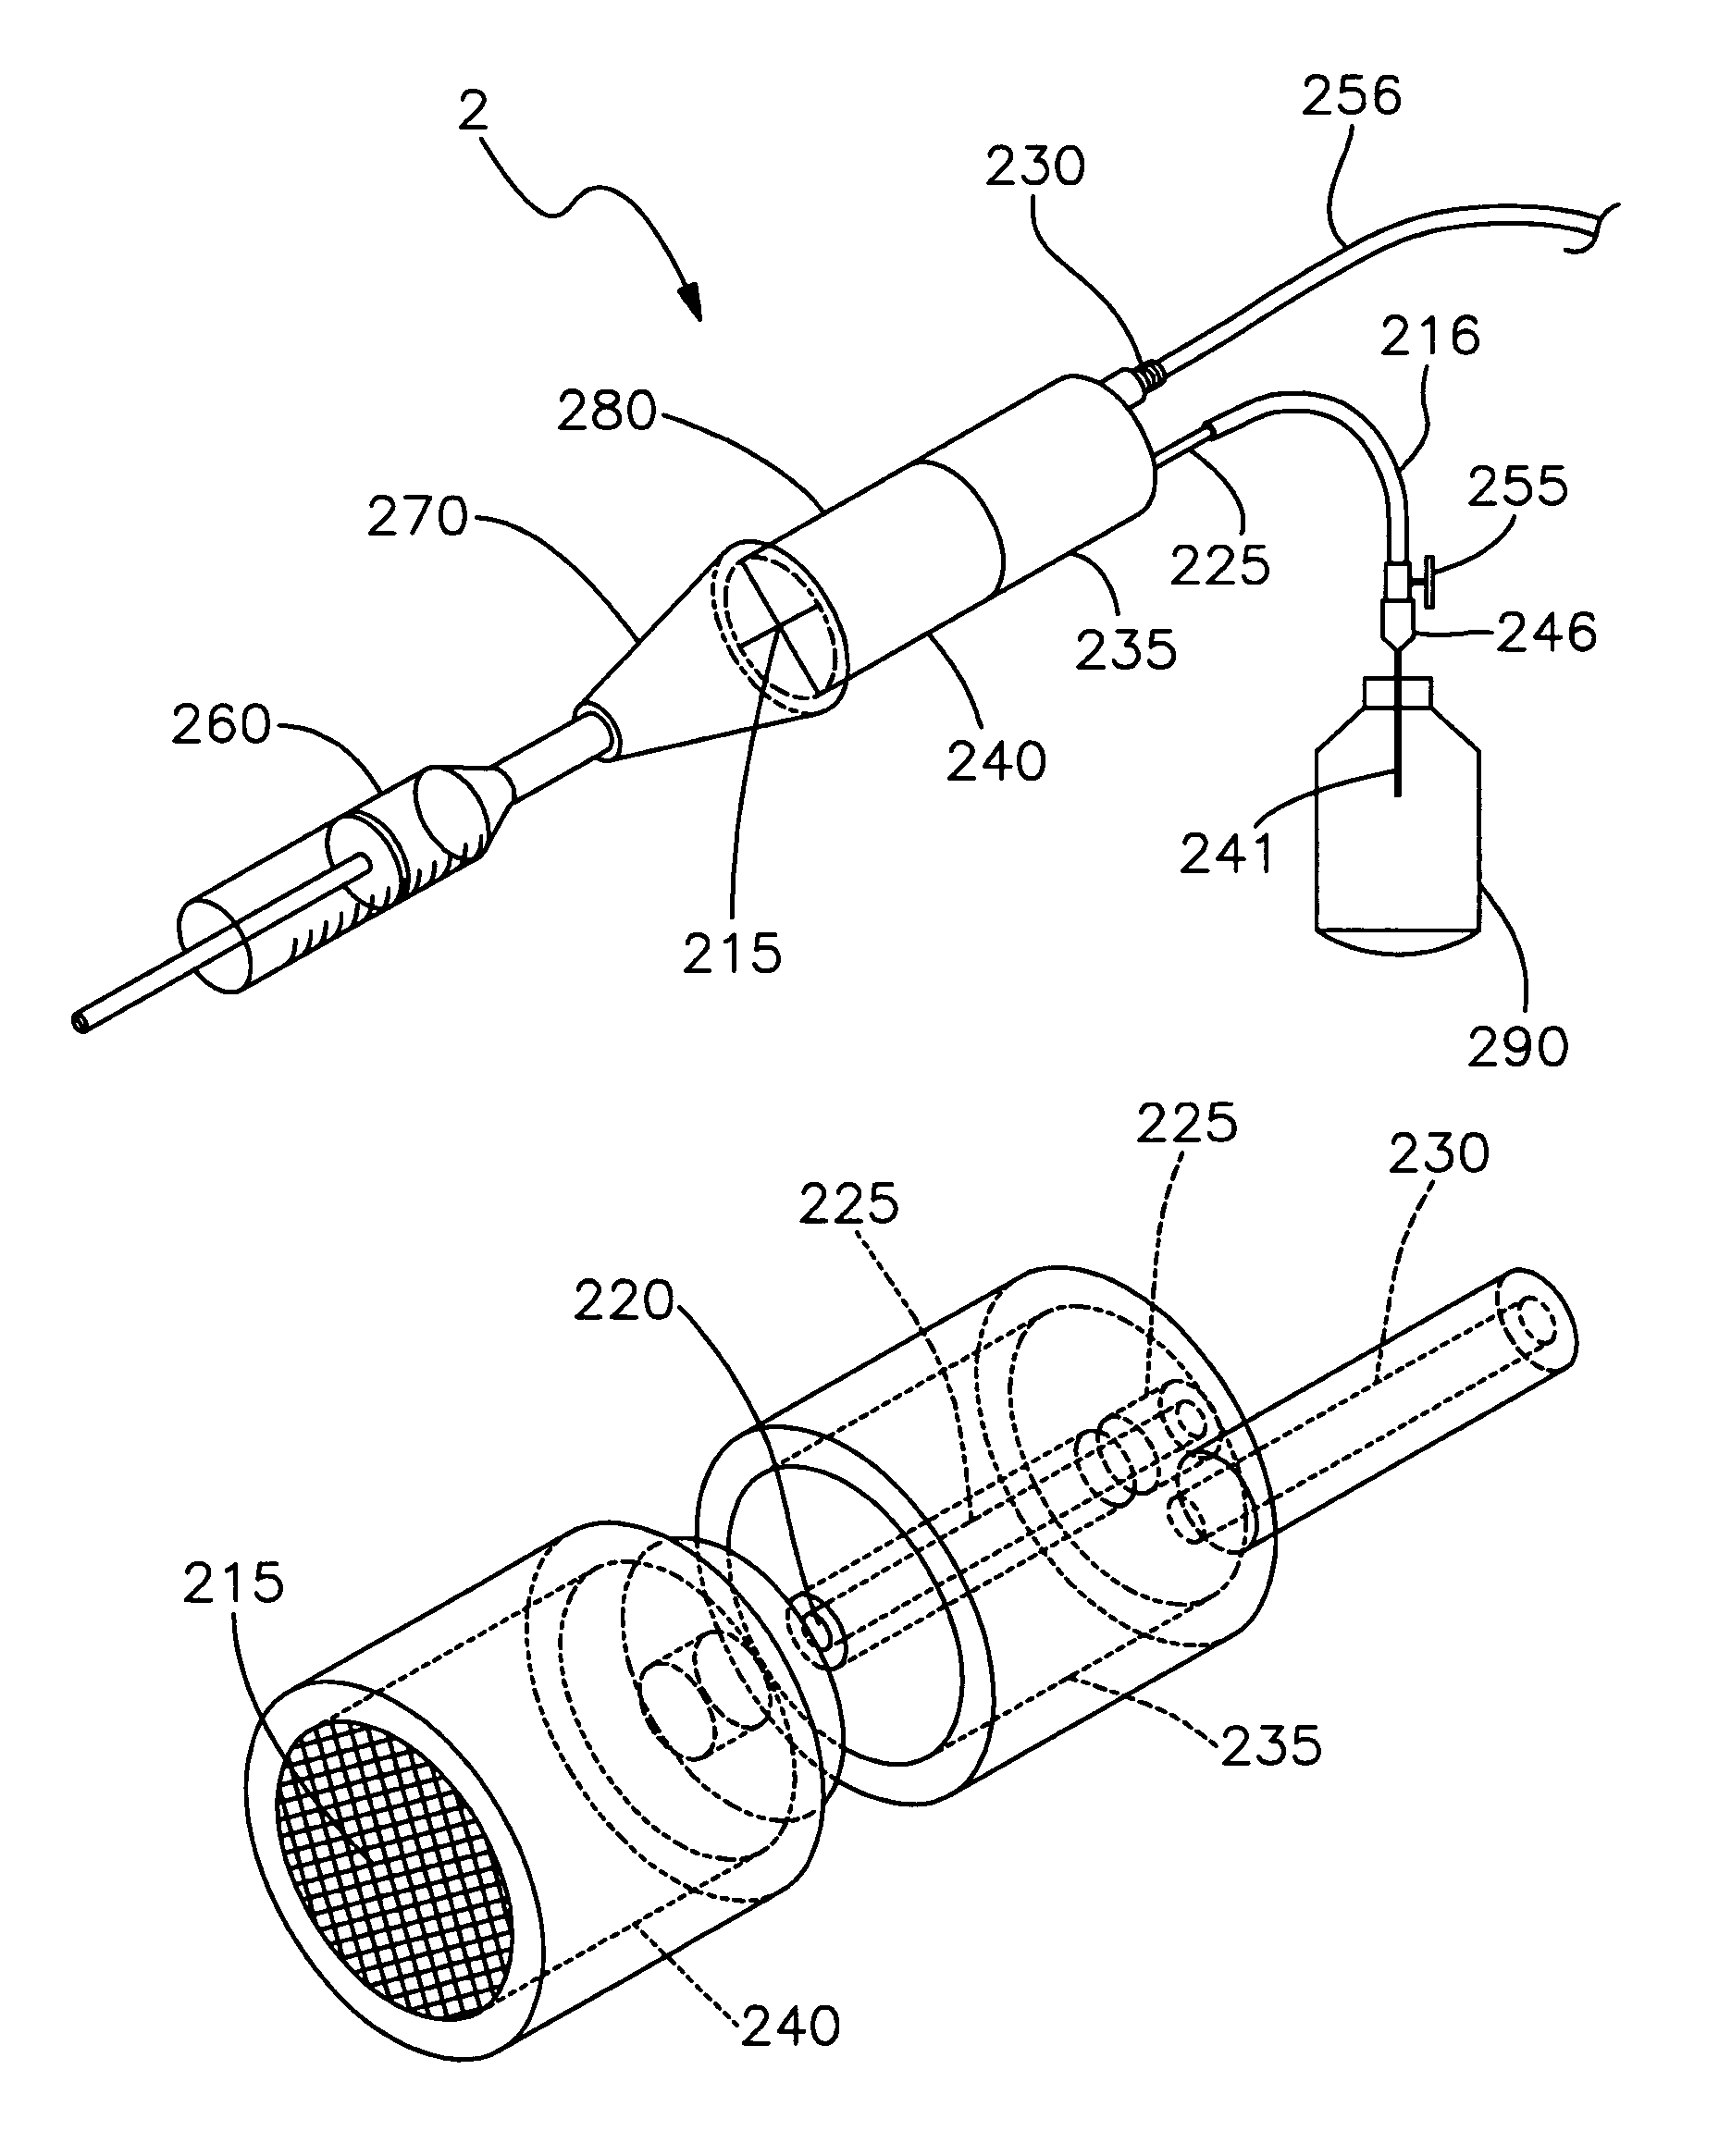 Apparatus and process for producing CO2 enriched medical foam